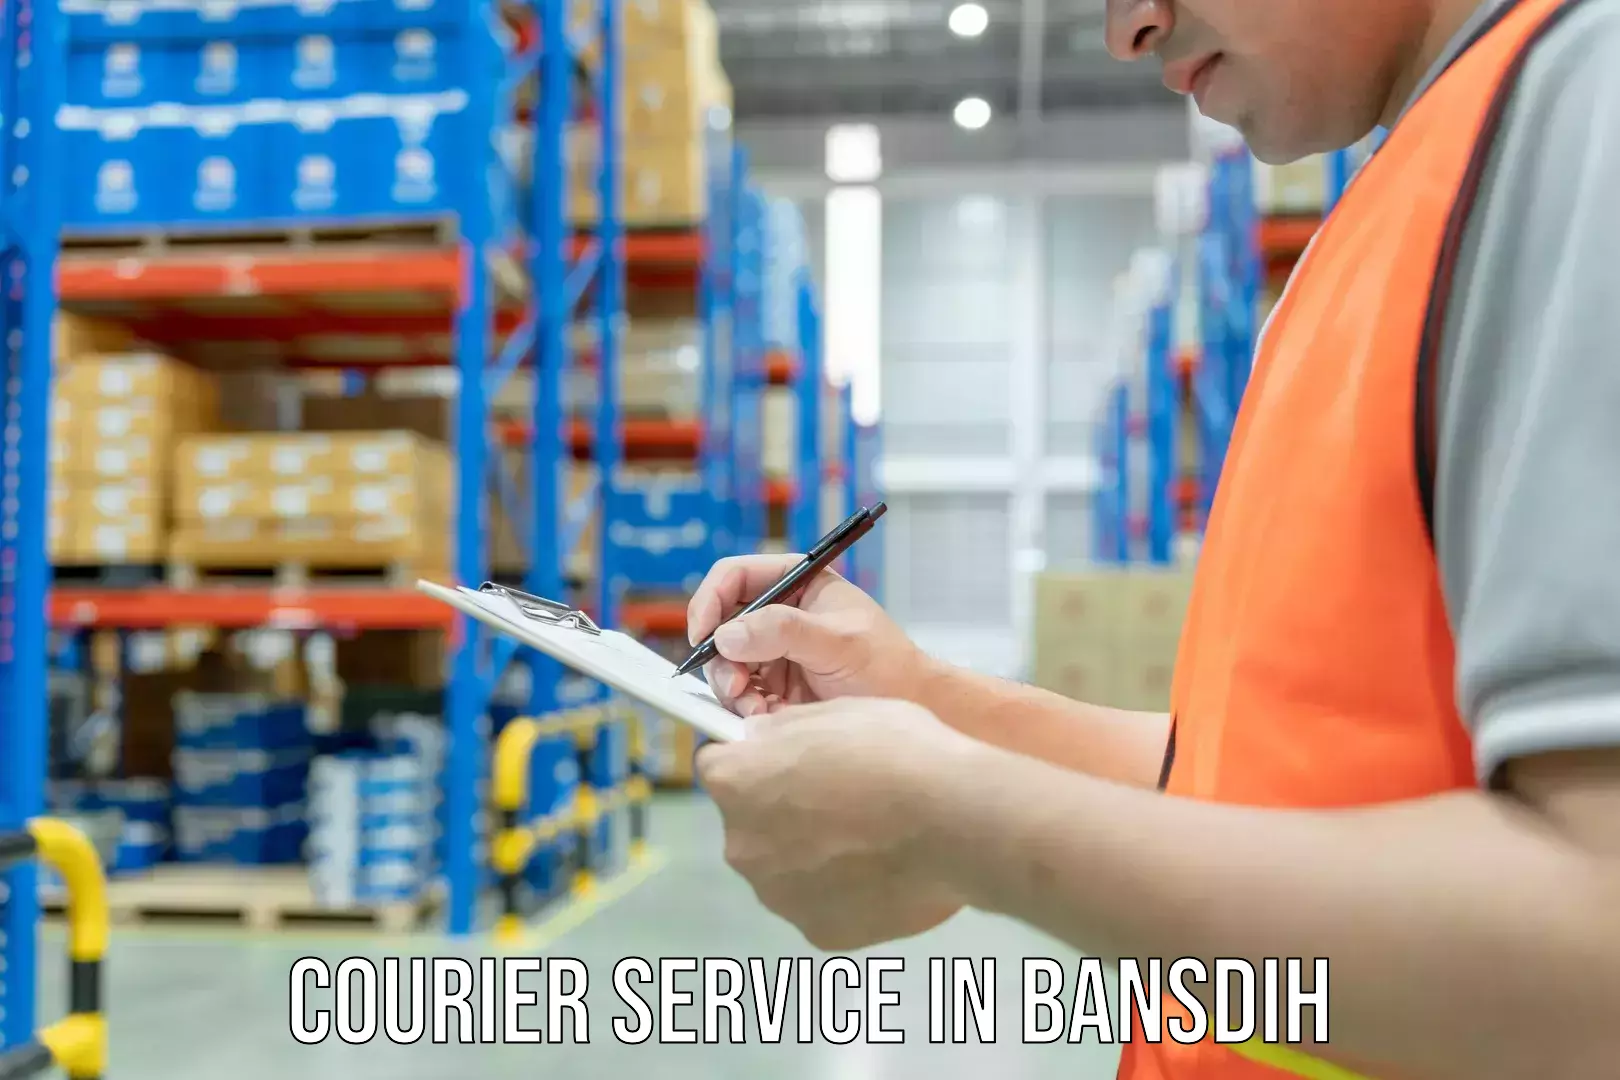 E-commerce logistics support in Bansdih